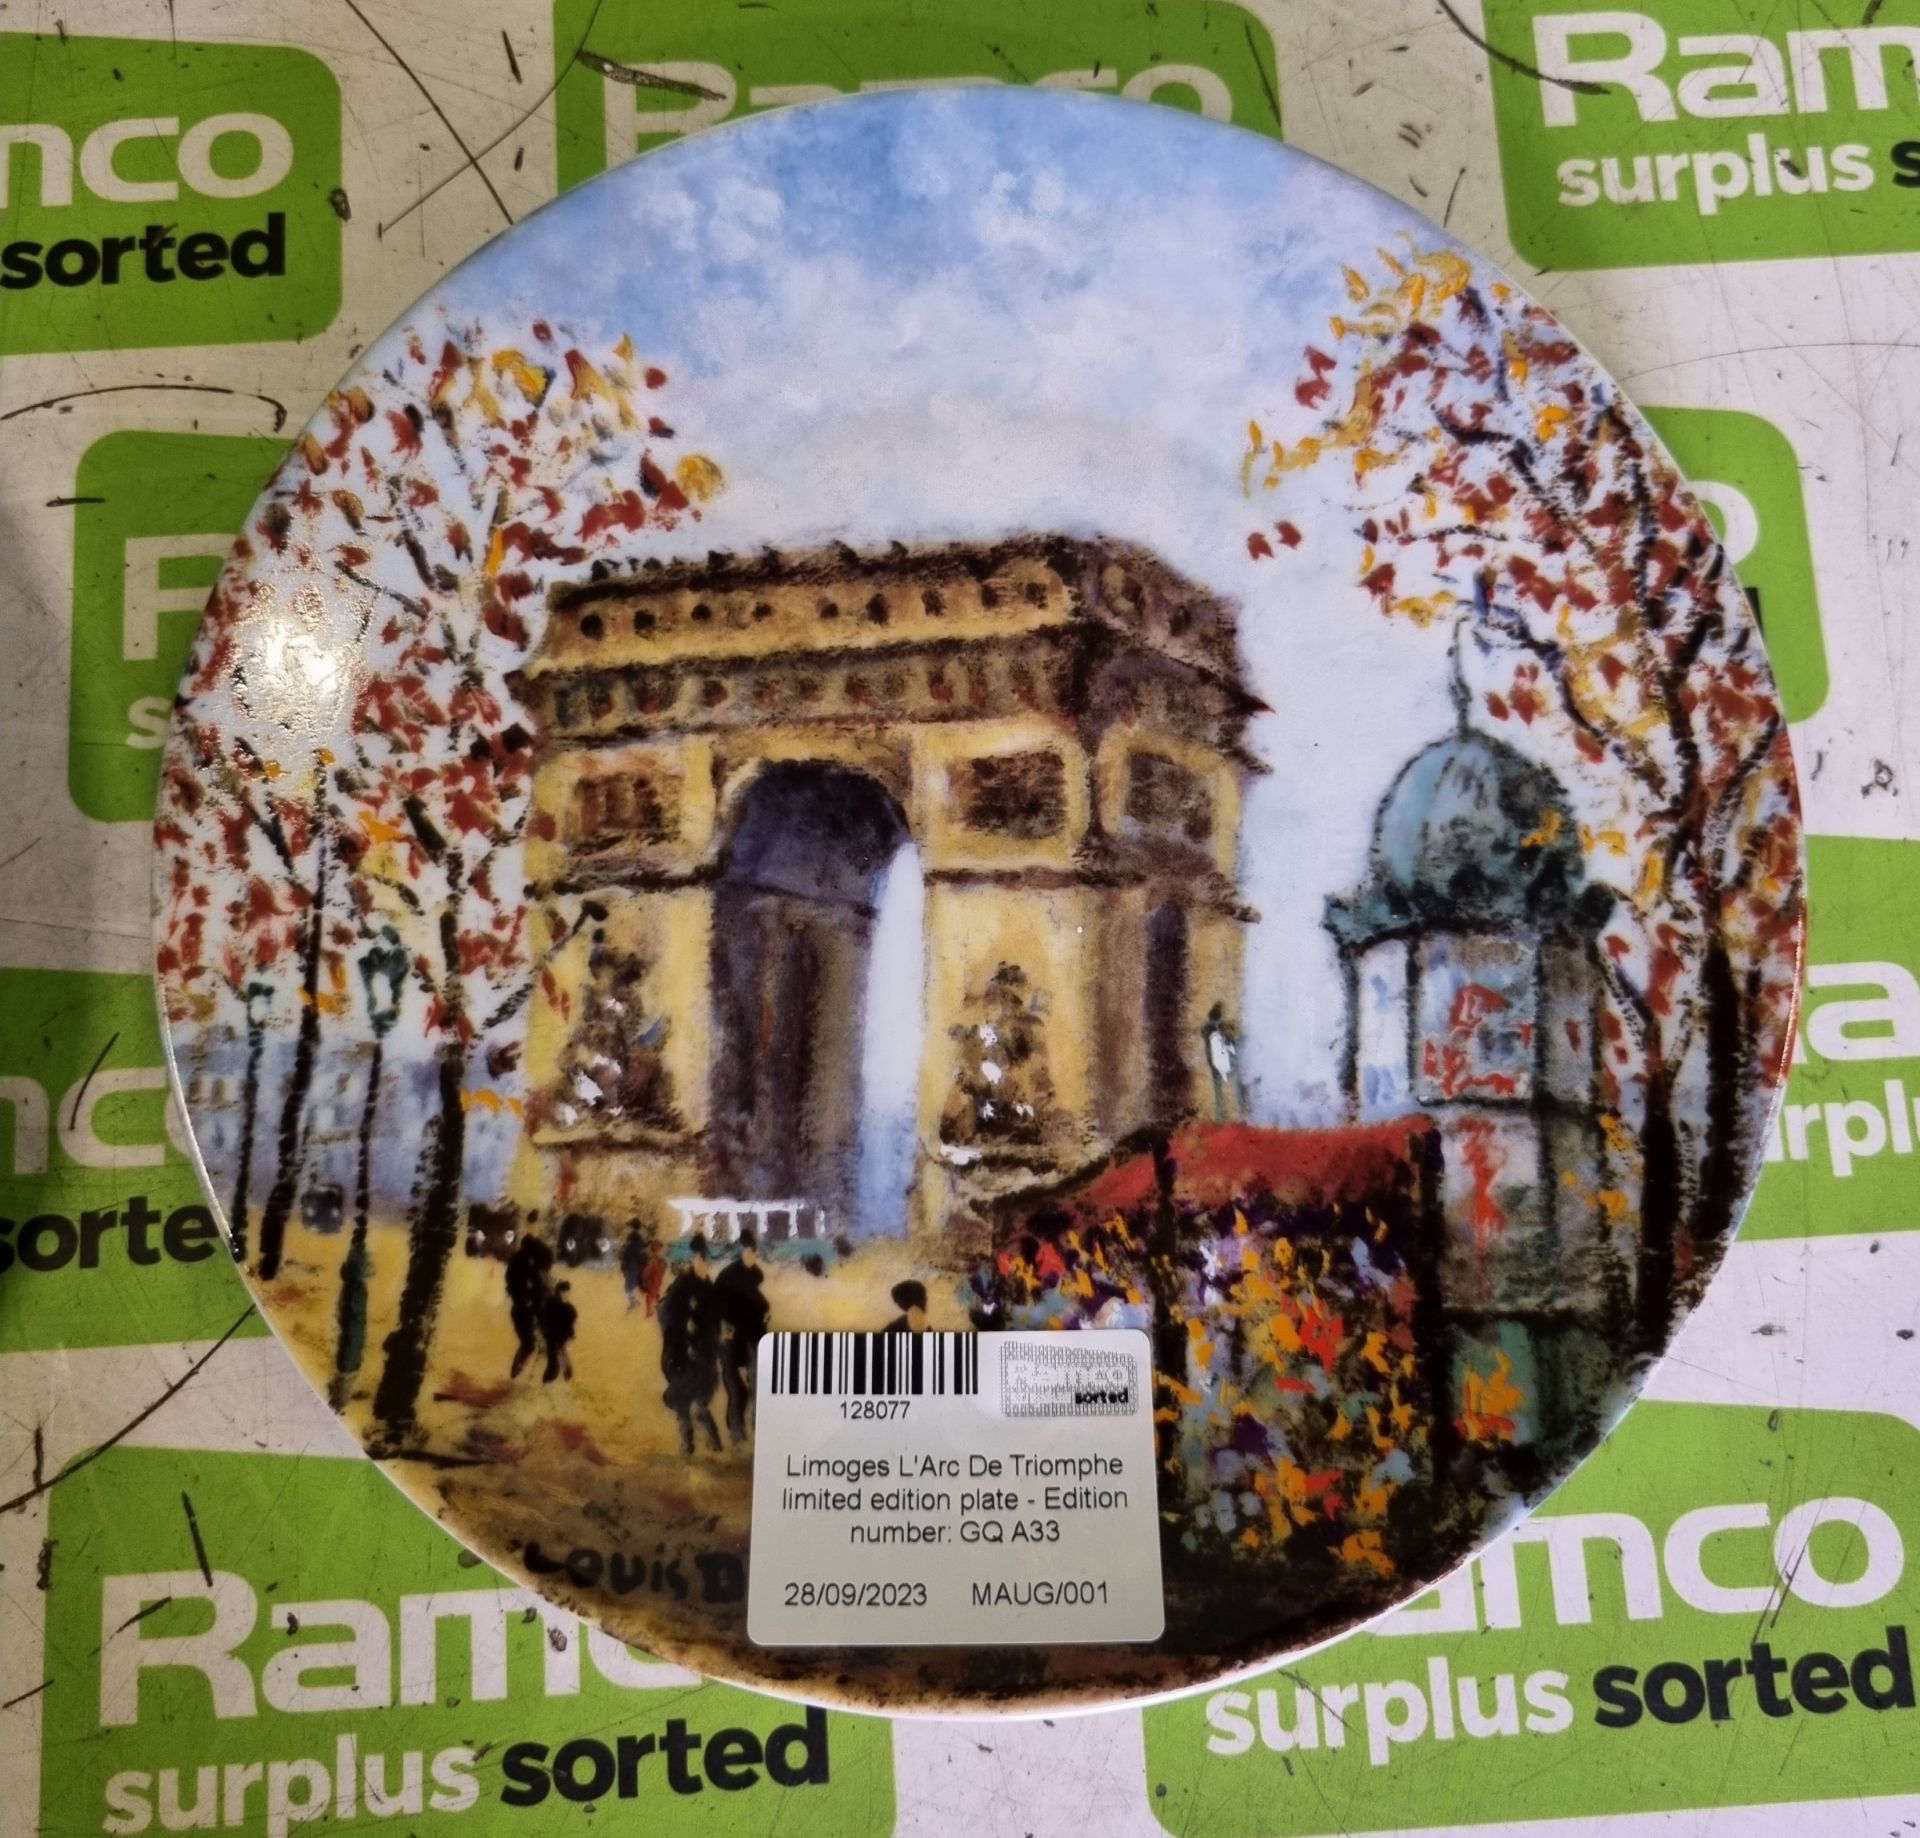 Limoges L'Arc De Triomphe limited edition plate - Edition number: GQ A33, Poole "Springtime on your - Image 3 of 6